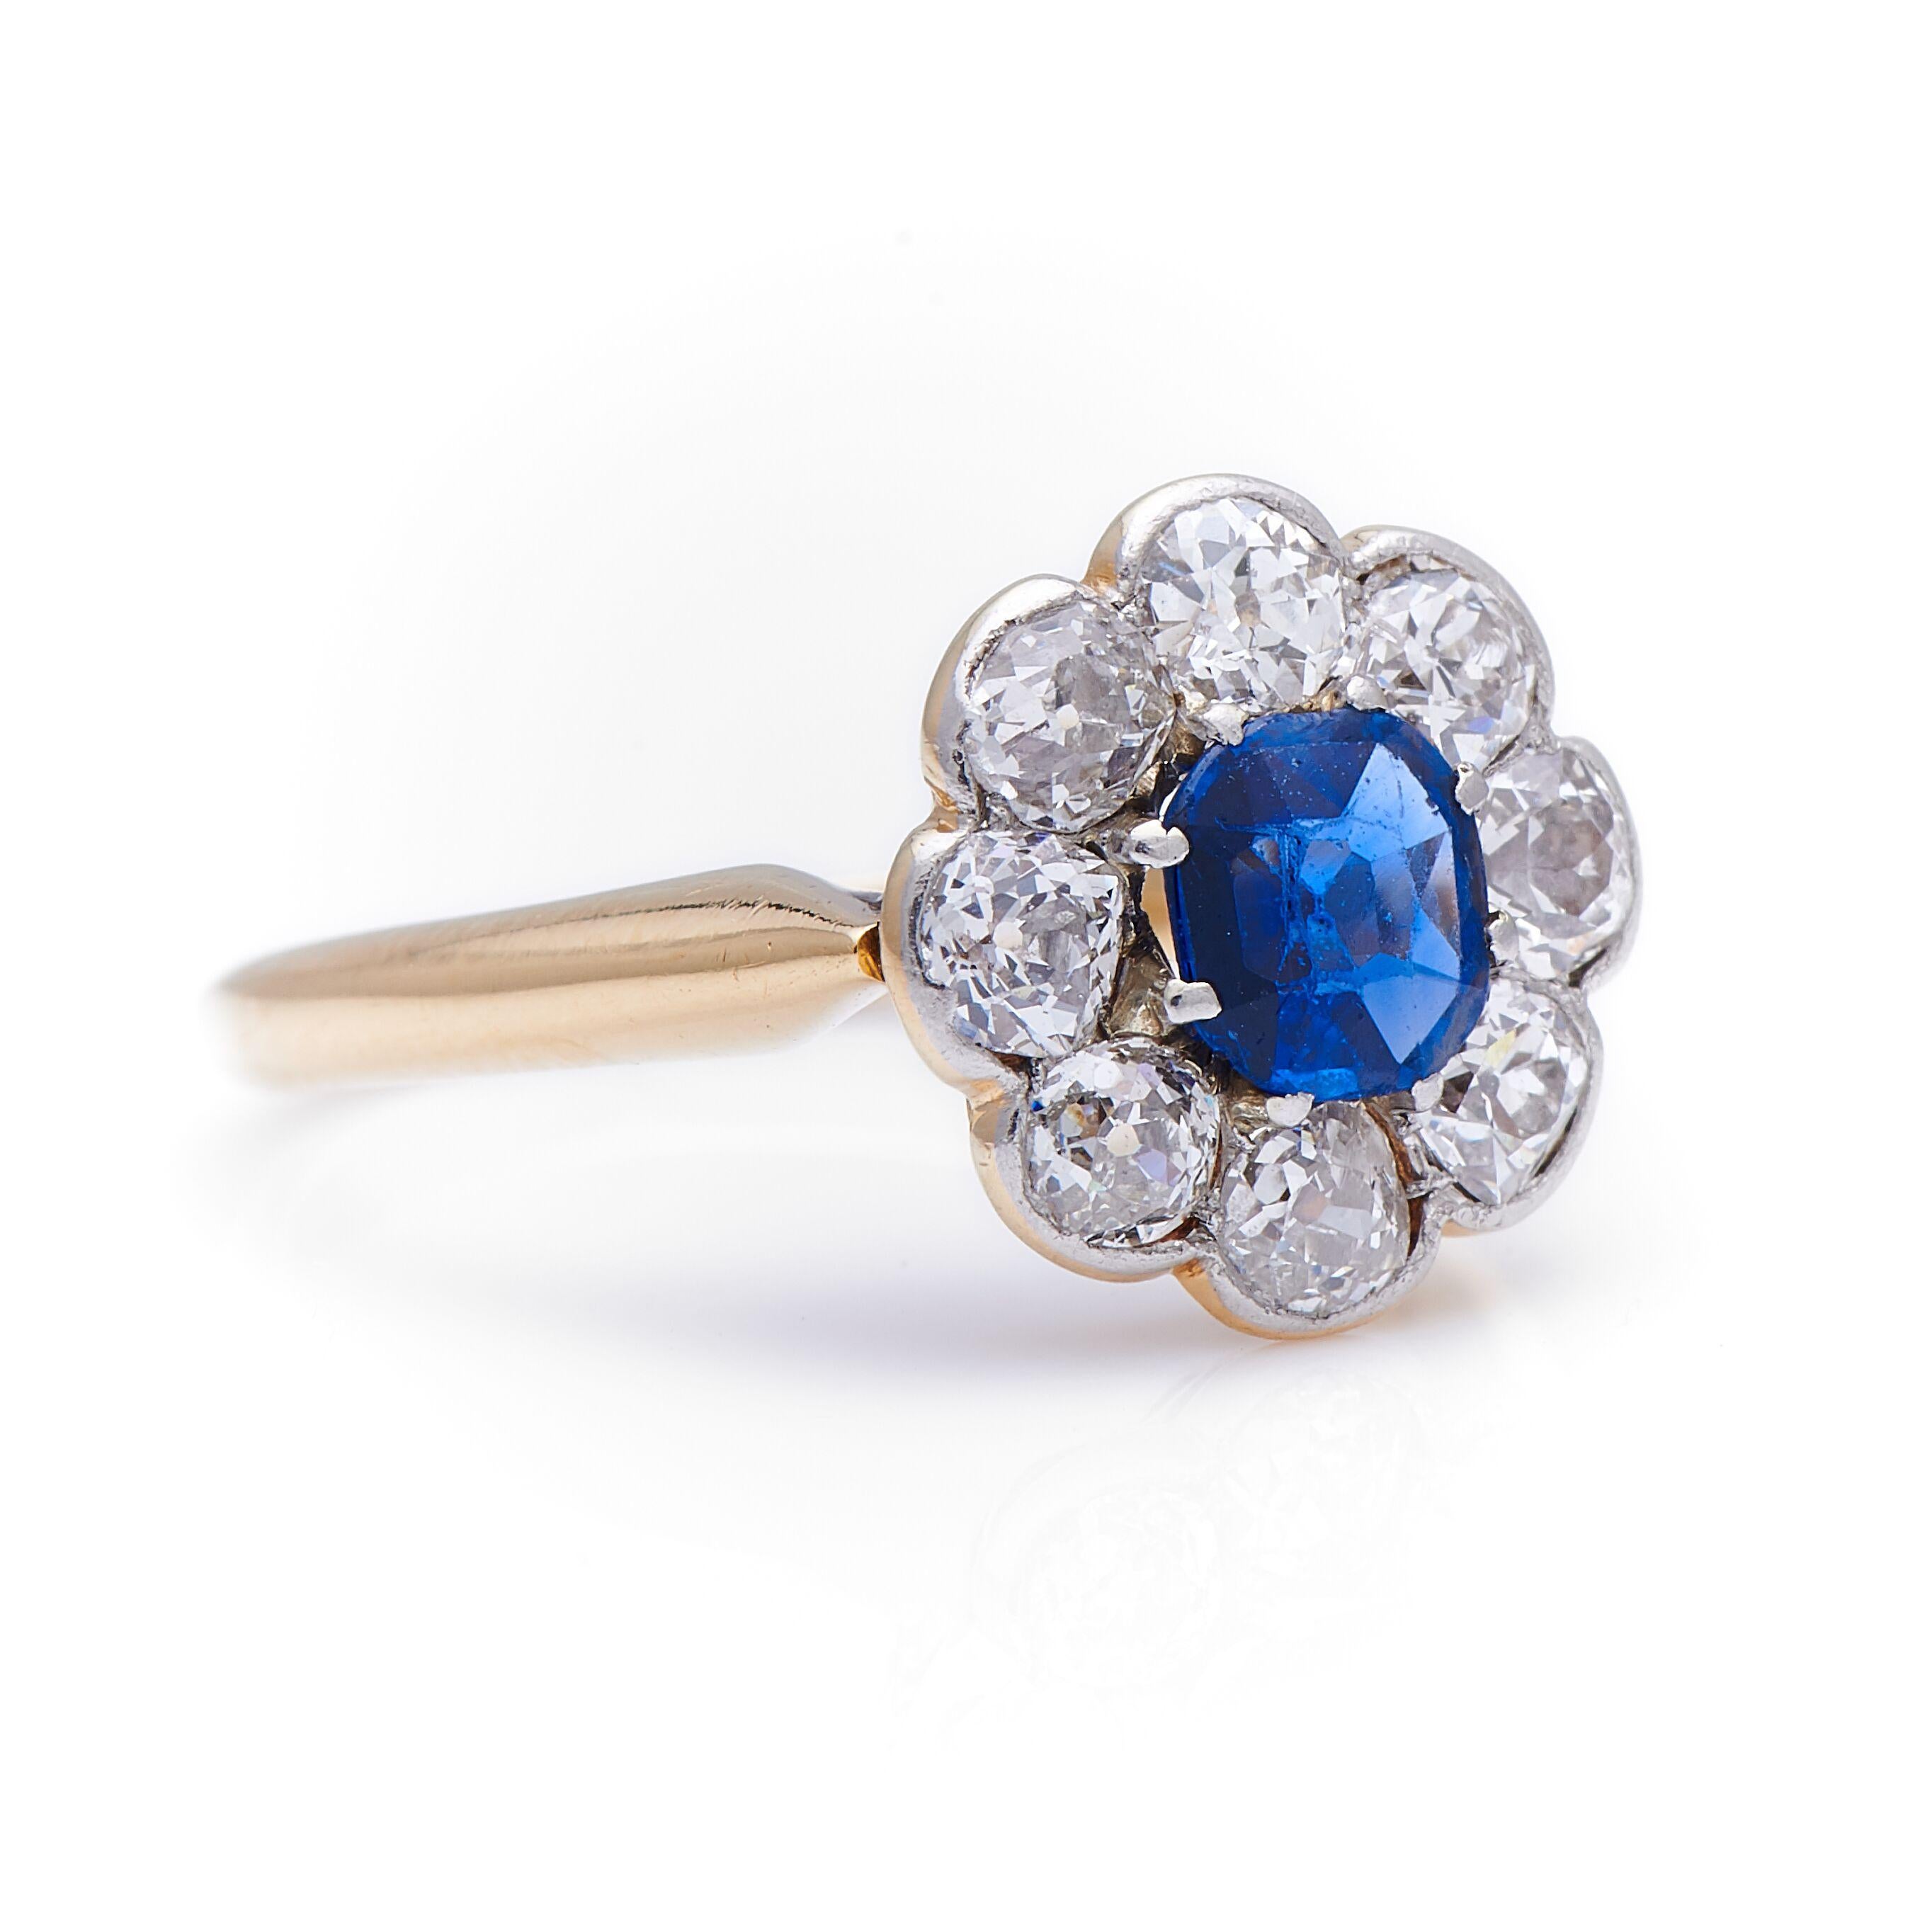 Sapphire and diamond cluster ring, circa 1900. A wonderful example of a classic engagement ring set to centre a stunning mid-blue cushion-cut sapphire enhanced by a boarder of old-cut diamonds. The diamonds are very bright, with plenty of sparkle,